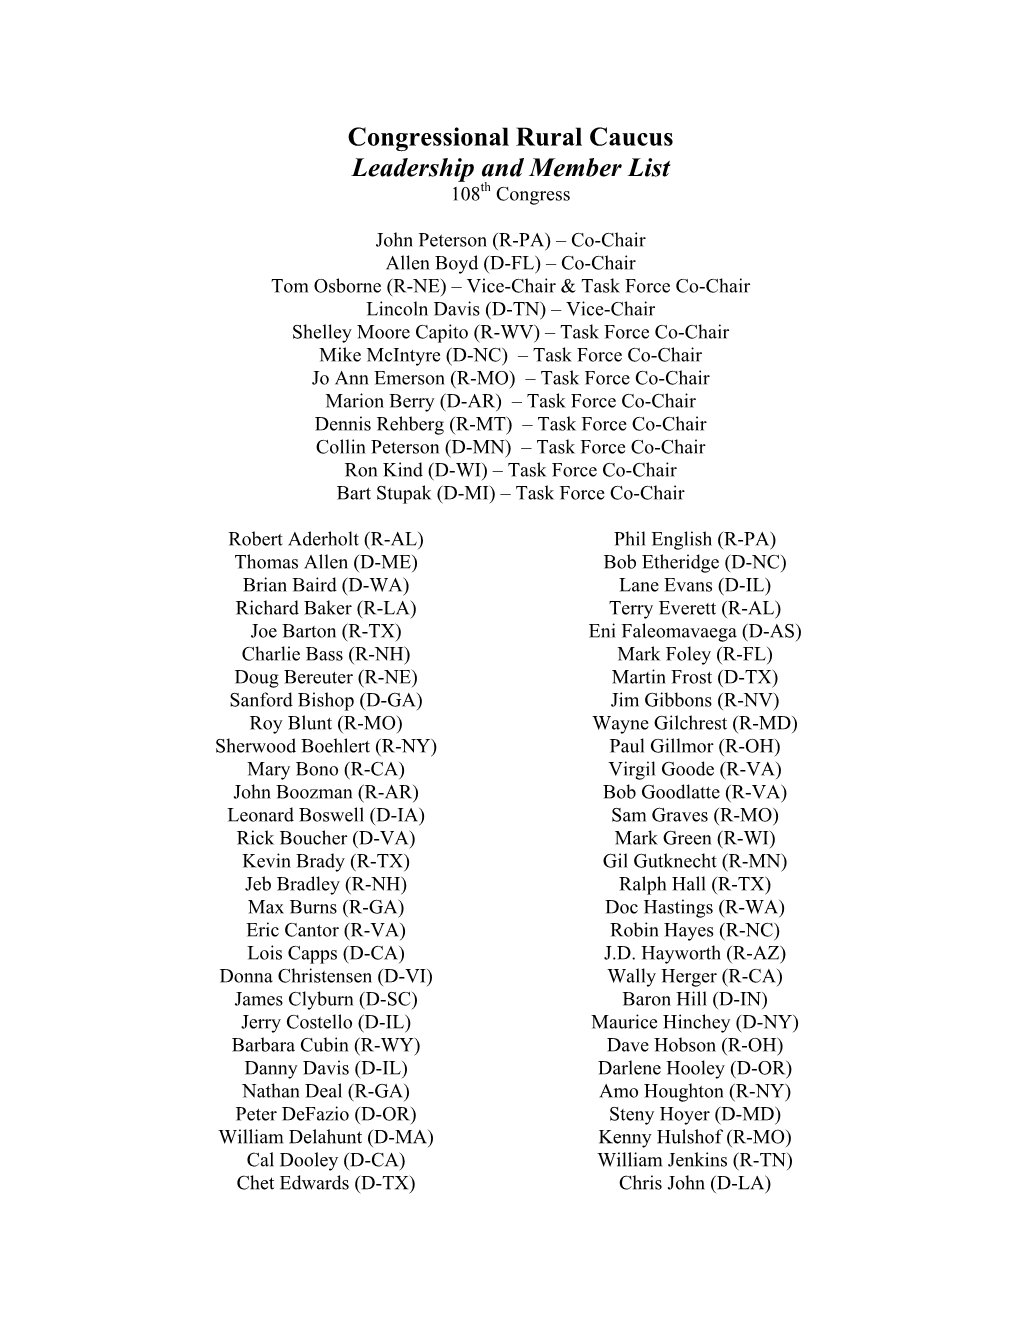 Congressional Rural Caucus Leadership and Member List 108Th Congress